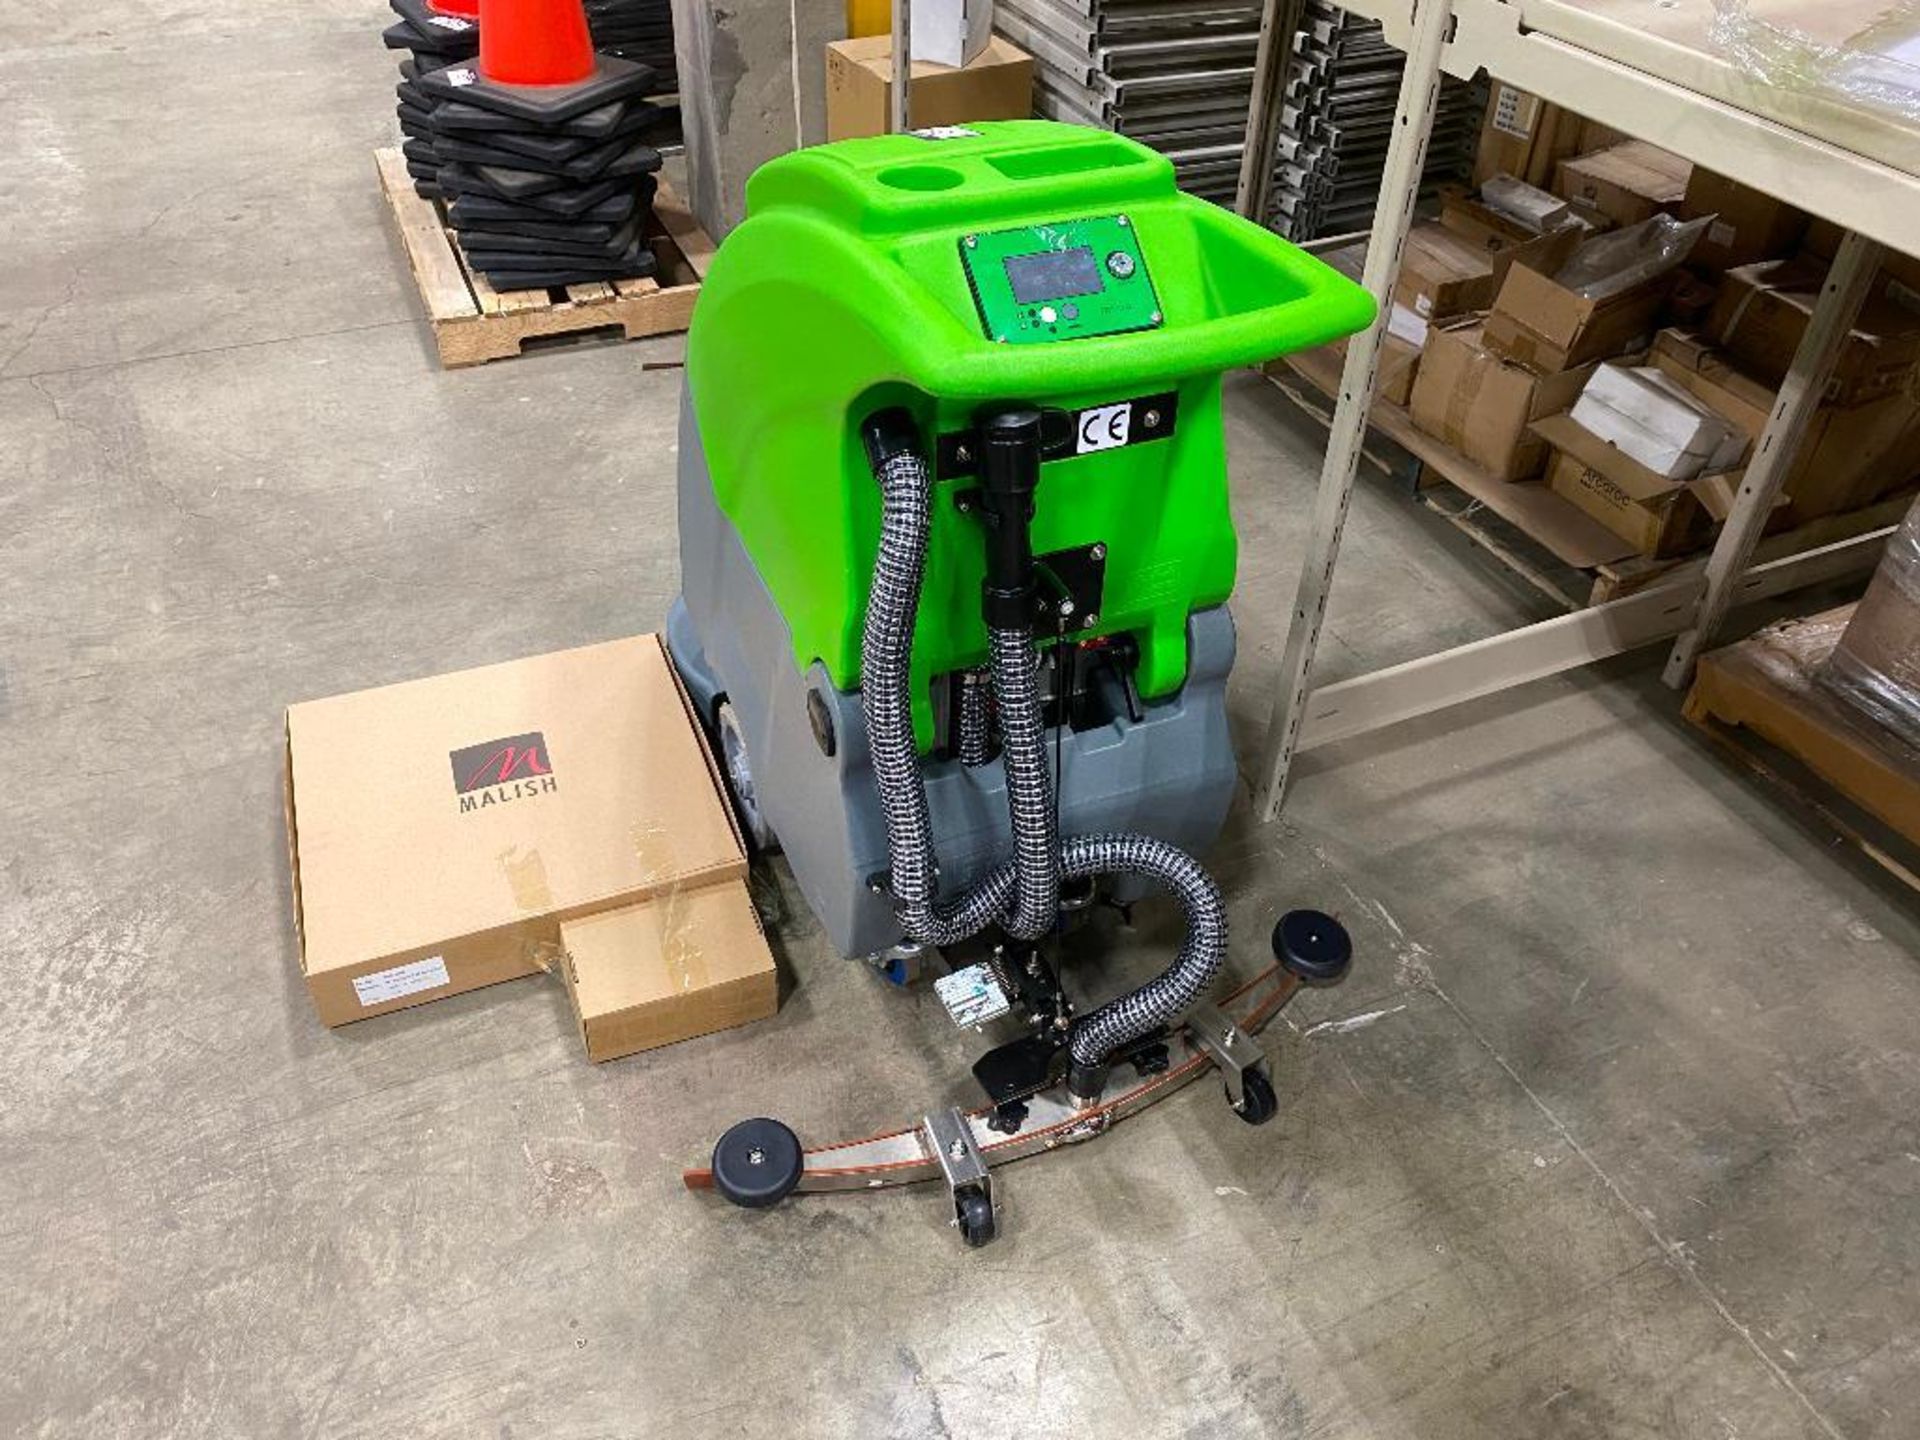 New 2022 Aokeqi OK-500 19" Wide Walk Behind Electric Industrial Semi-Auto Floor Scrubber - Image 5 of 6